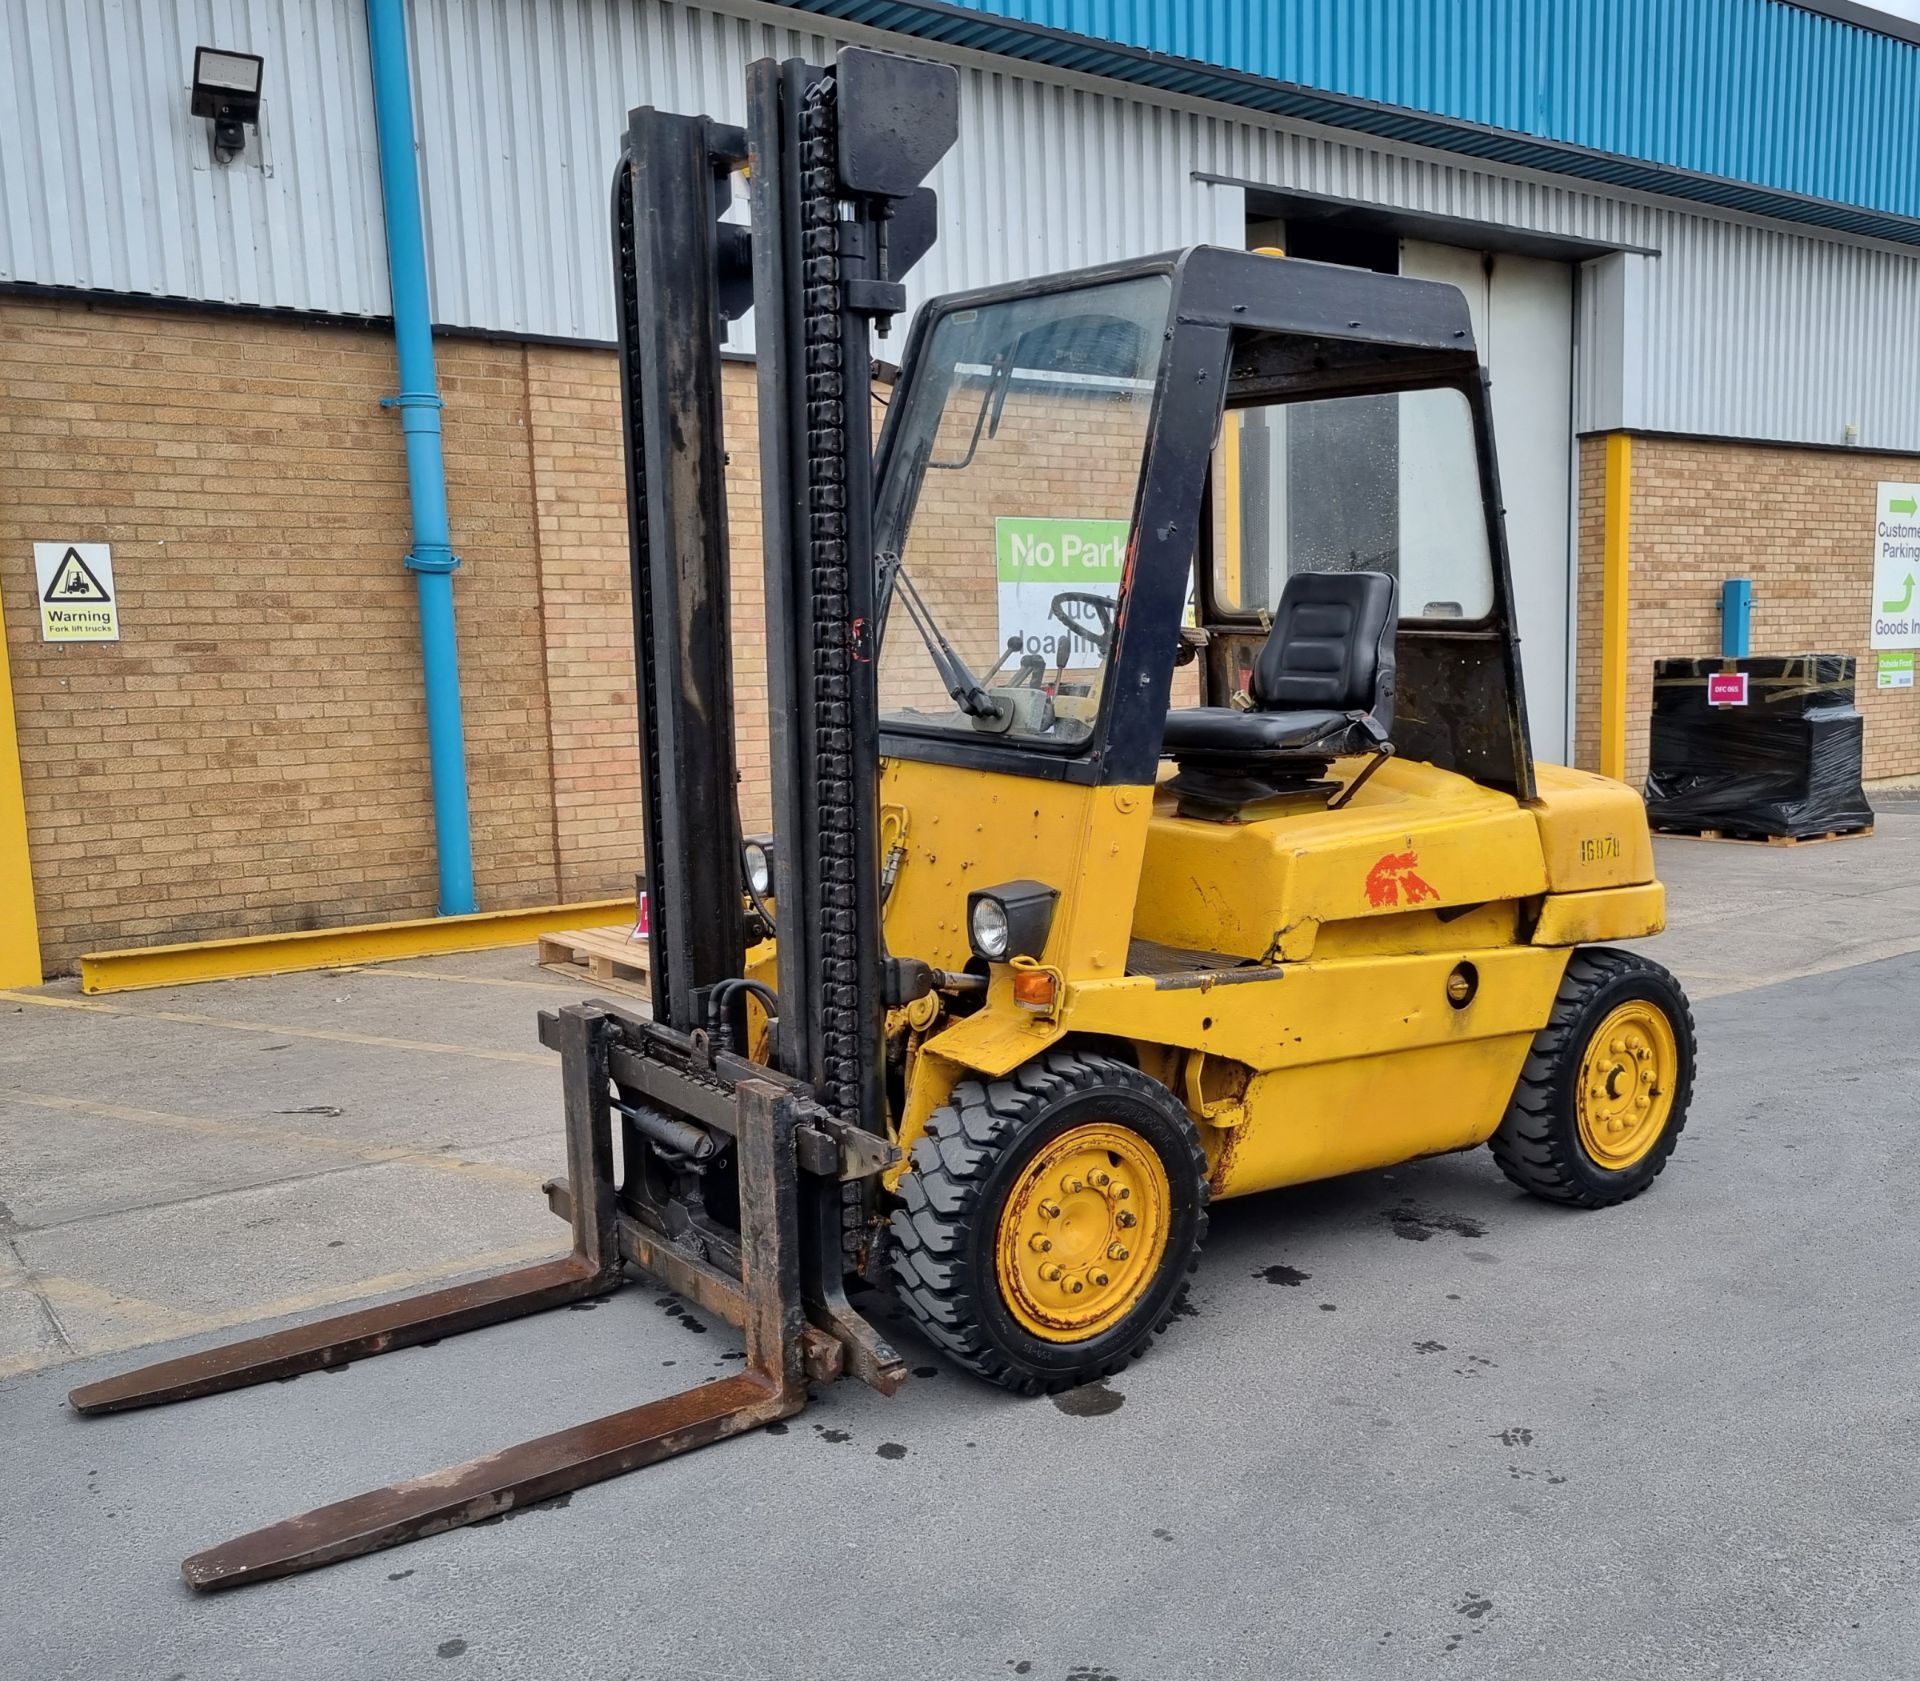 Linde H35D forklift with Cascade 60D-SS-527B side shift - Serial No. 3328060077 - 3400kg capacity